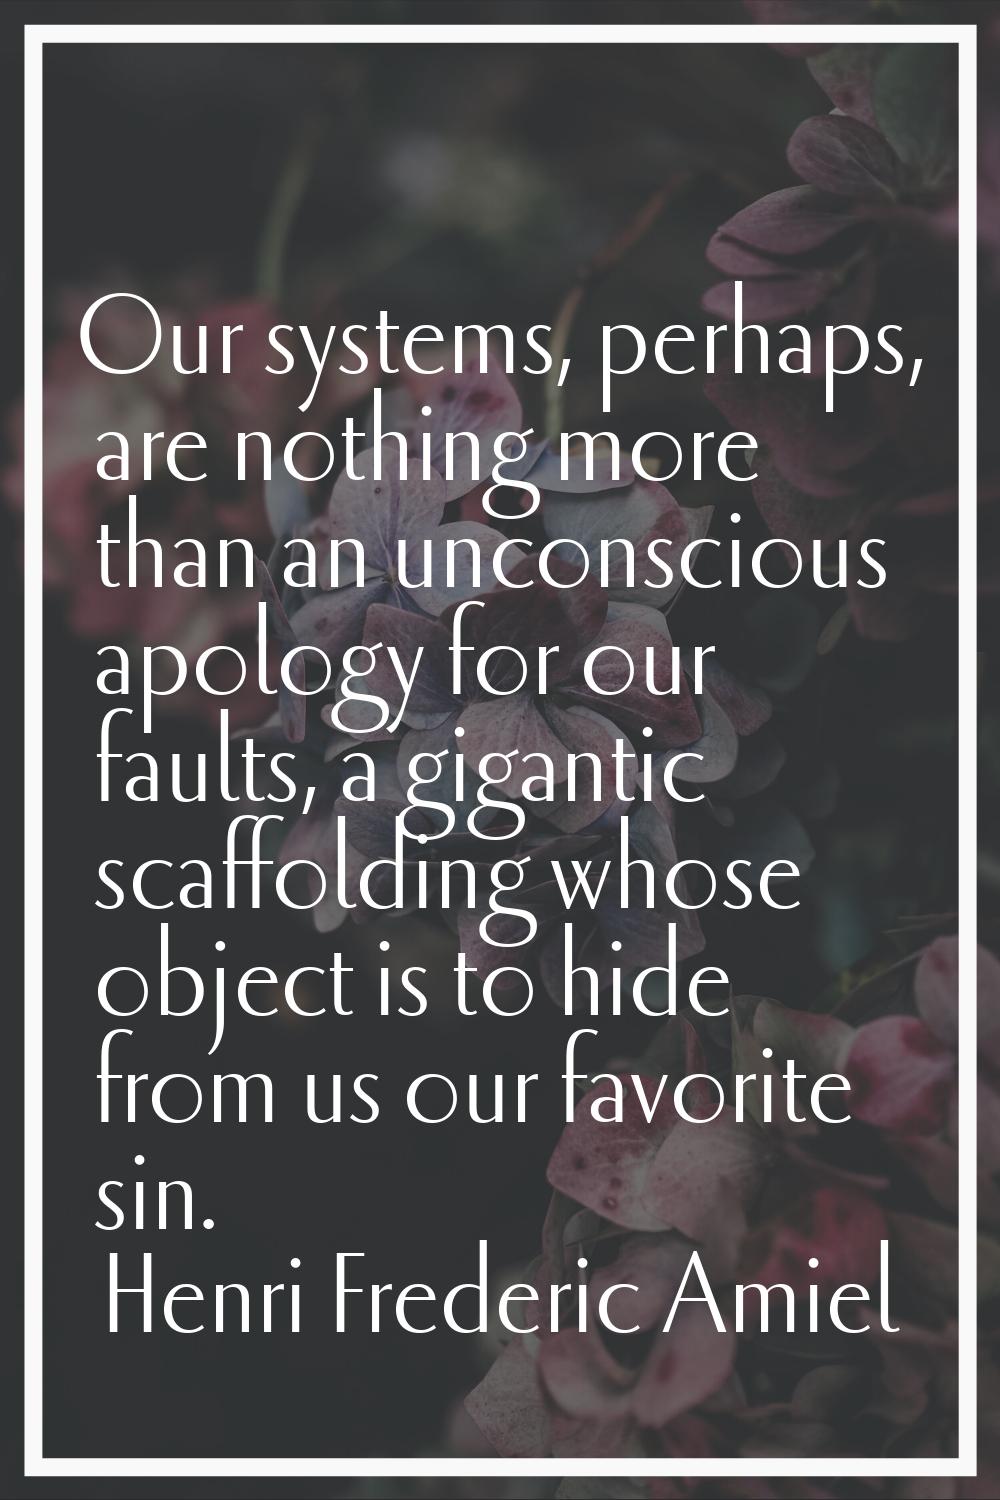 Our systems, perhaps, are nothing more than an unconscious apology for our faults, a gigantic scaff